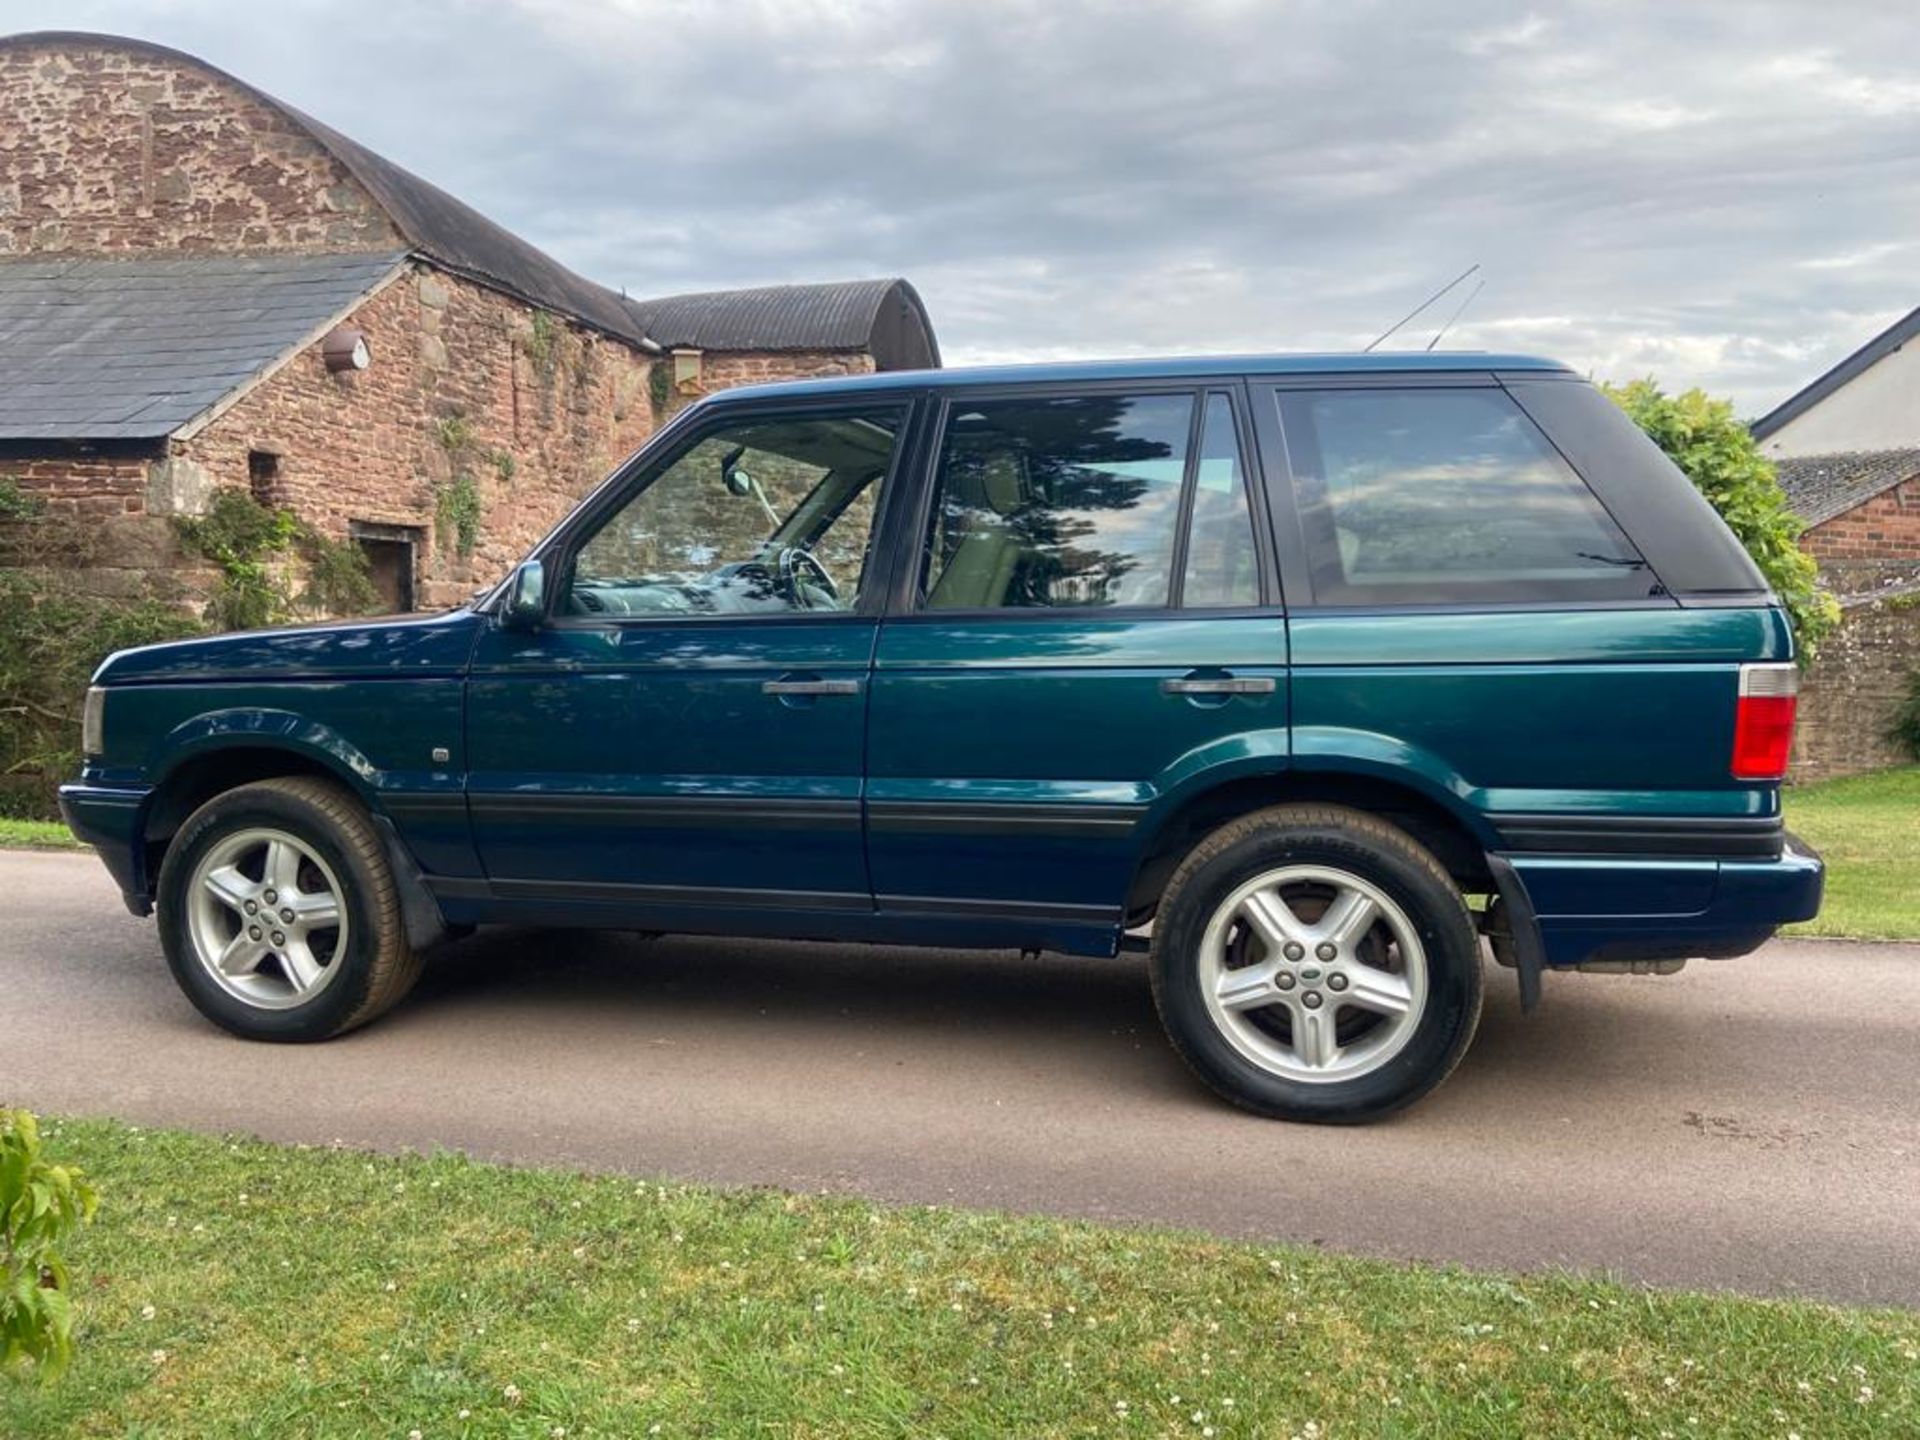 1998 Limited Edition Range Rover P38 - Image 2 of 39